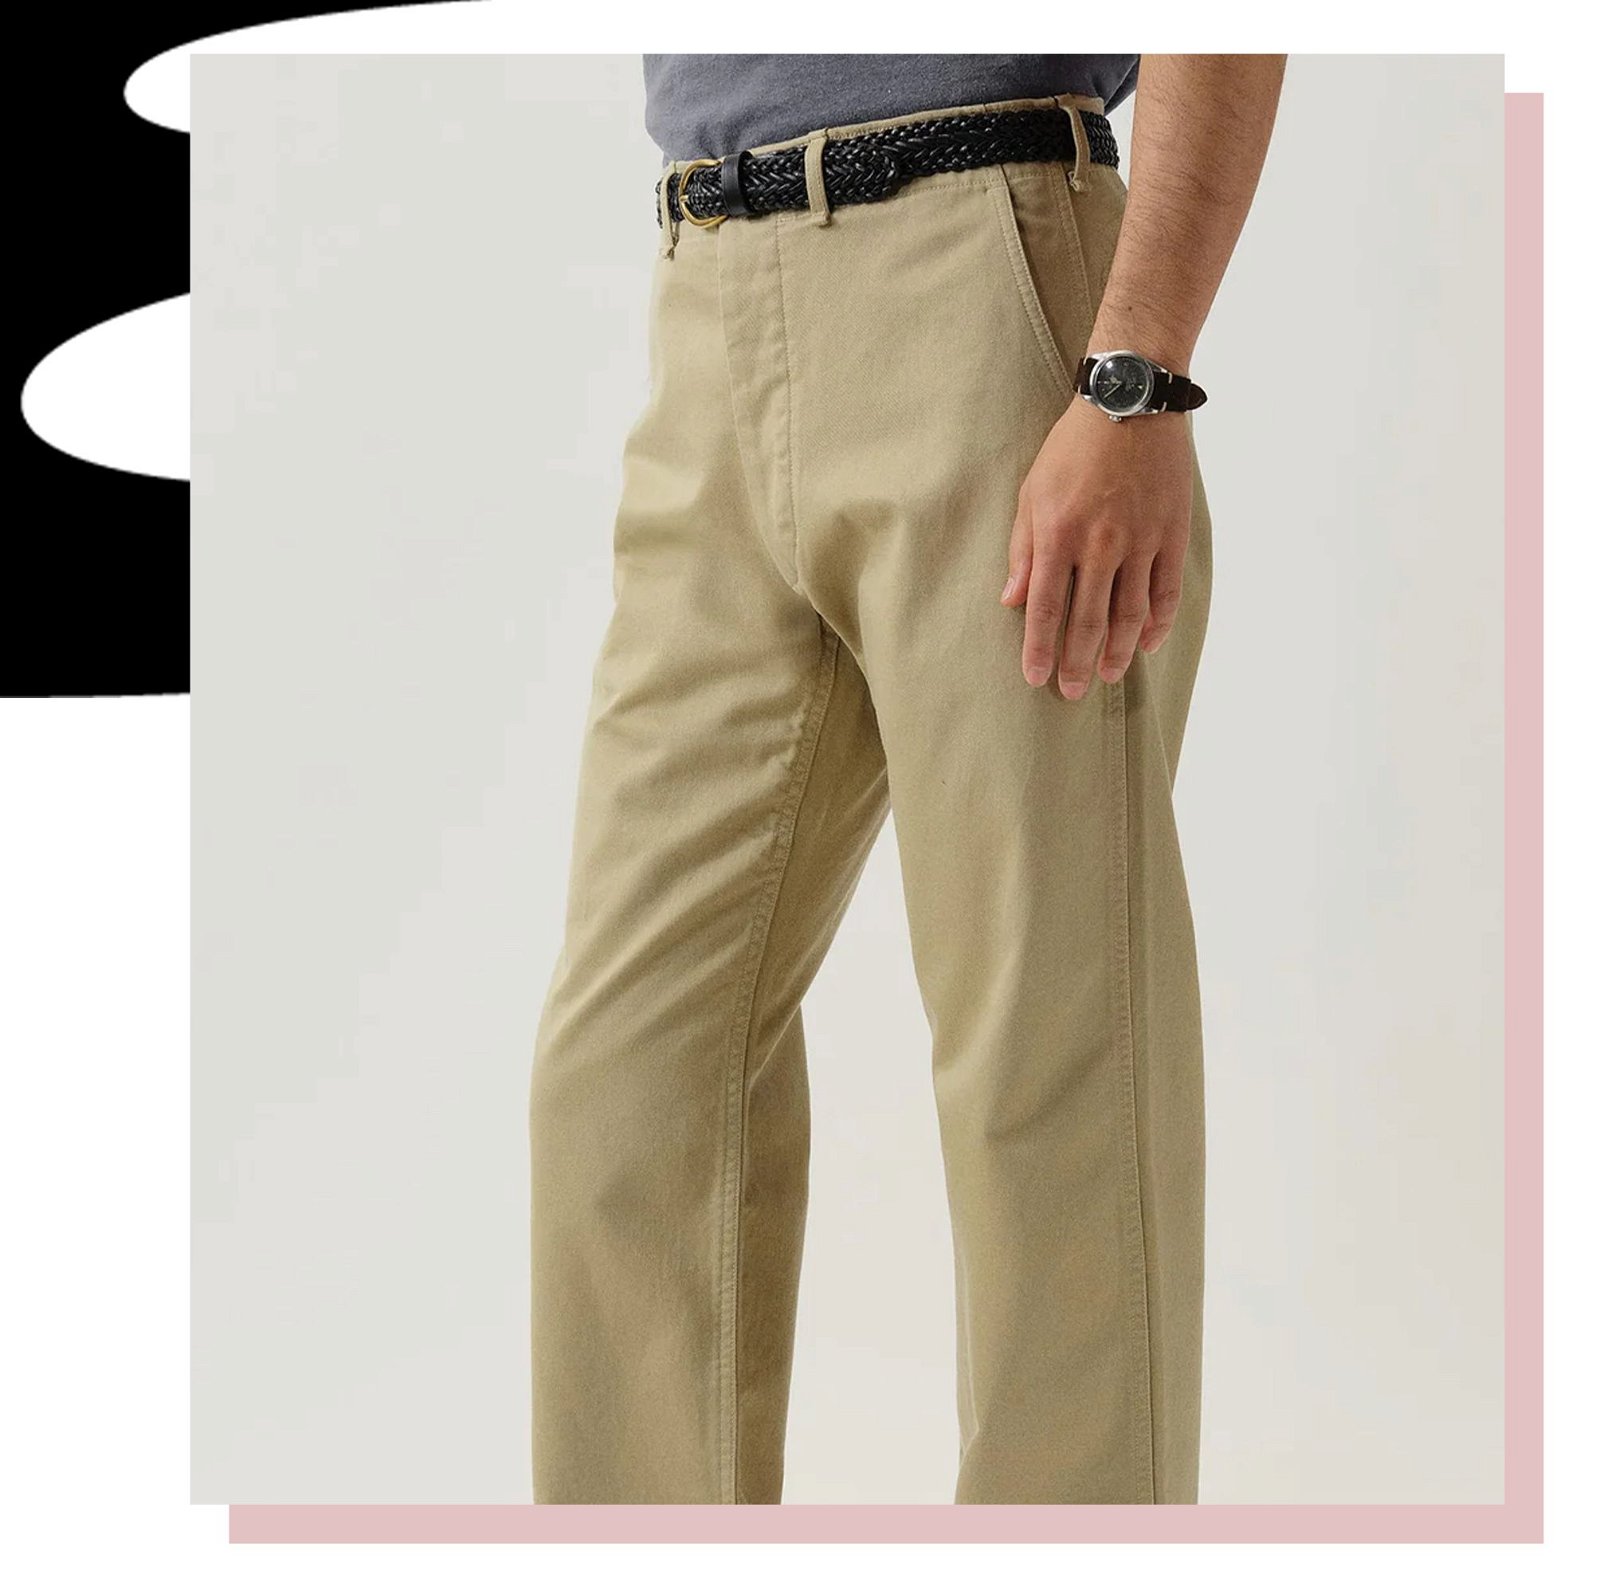 The 20 Best Khaki Pants Are More Than Just Chinos